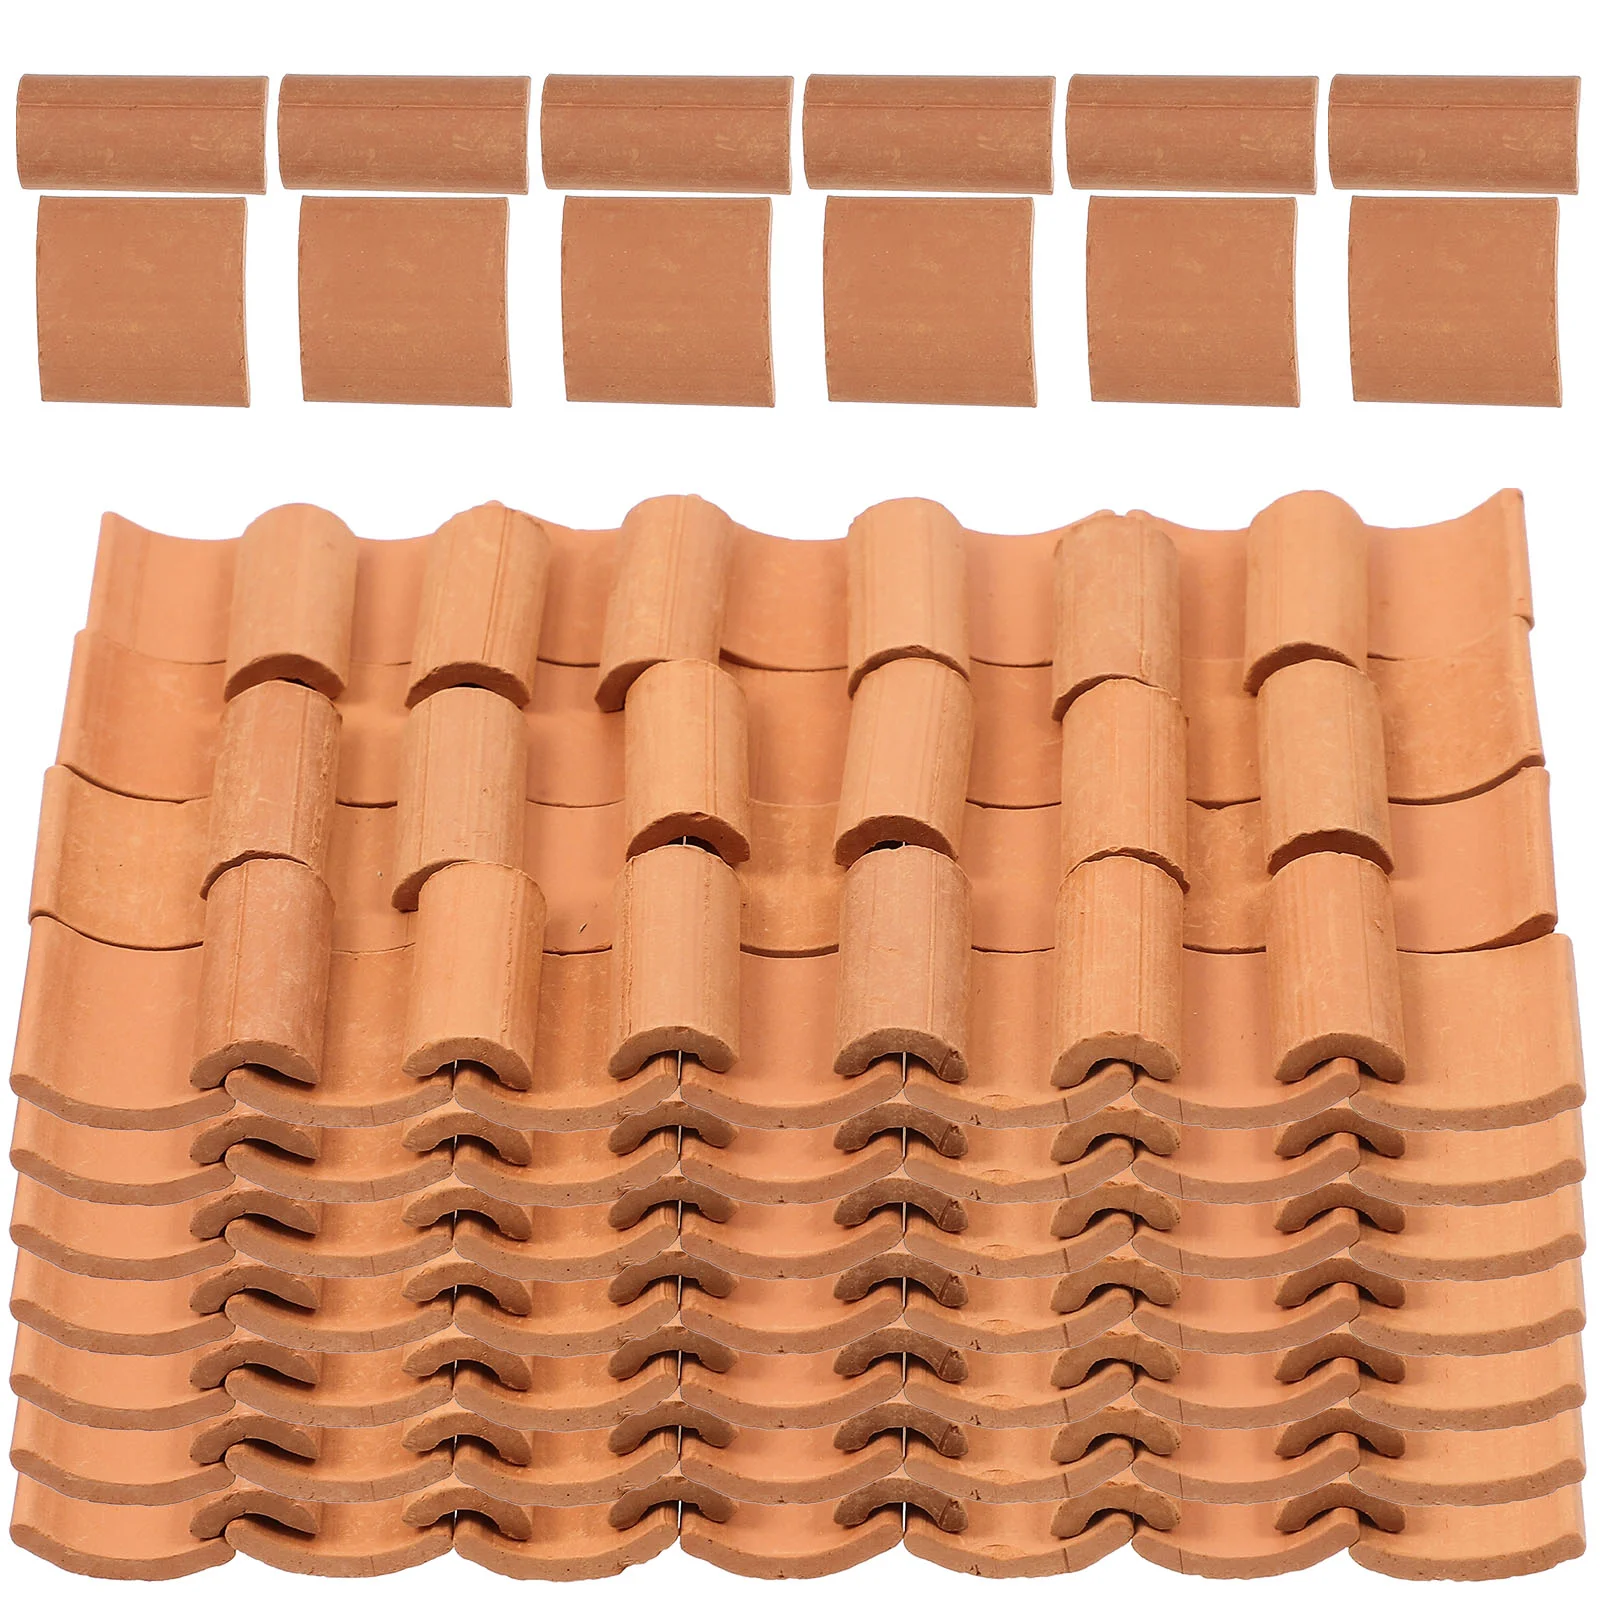 

120 Pcs Kids Tile Model Mini House Roof Tiles Simulated Models Props Lifelike Small Clay DIY Layout Decors Child